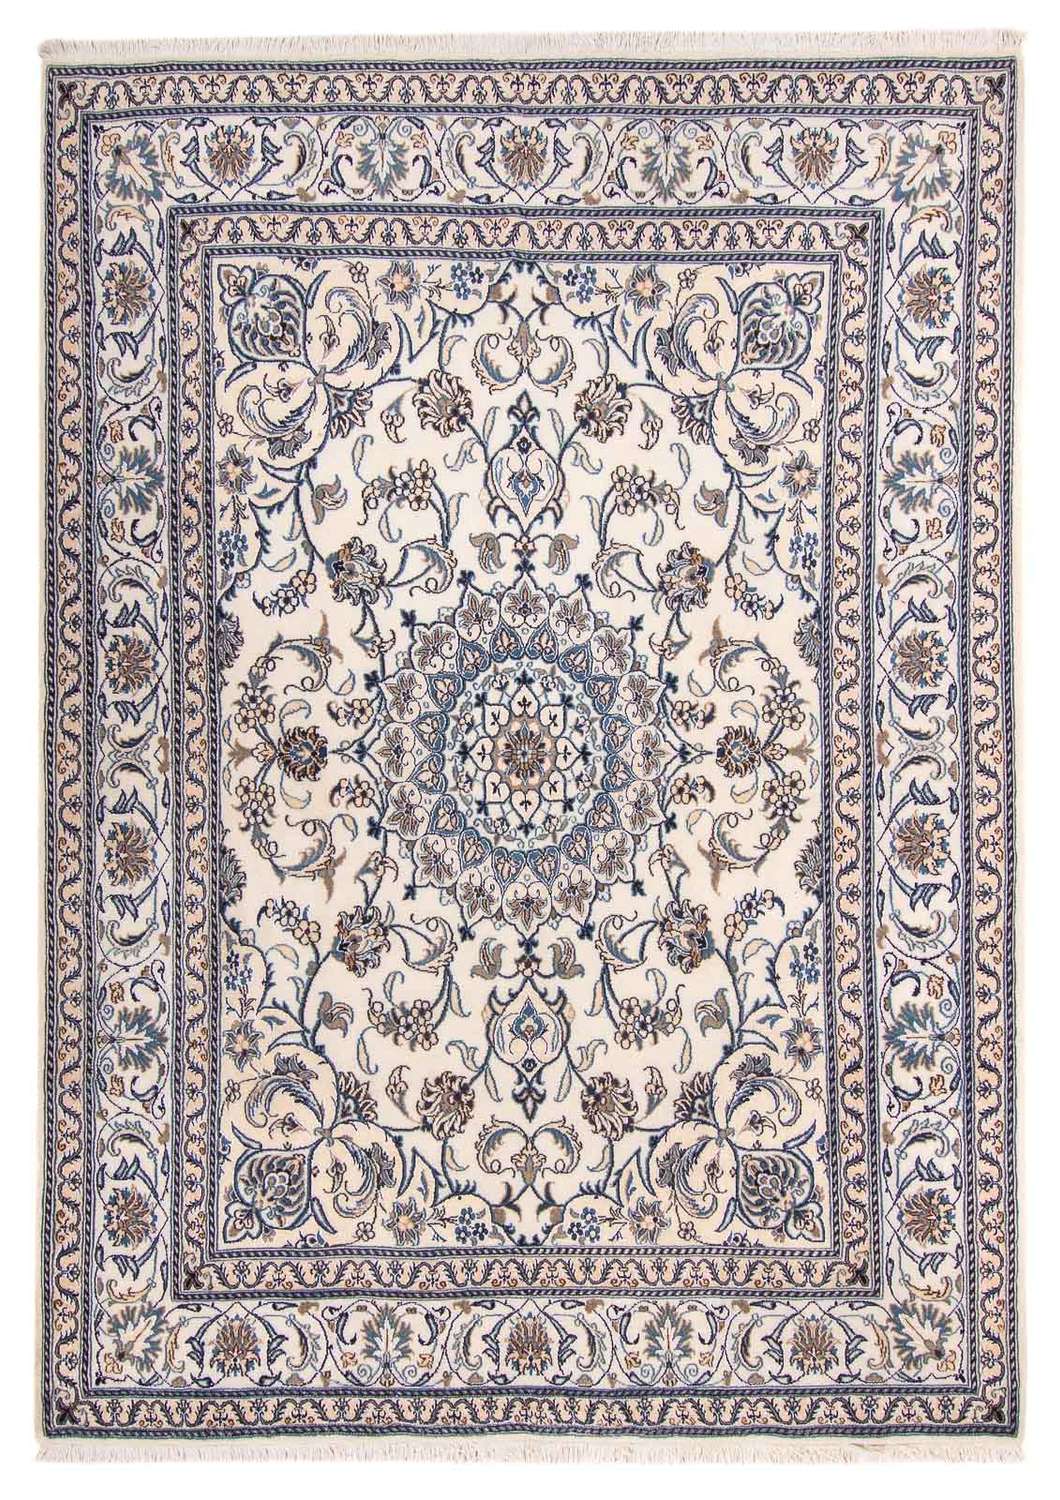 Persisk teppe - Nain - 266 x 198 cm - beige